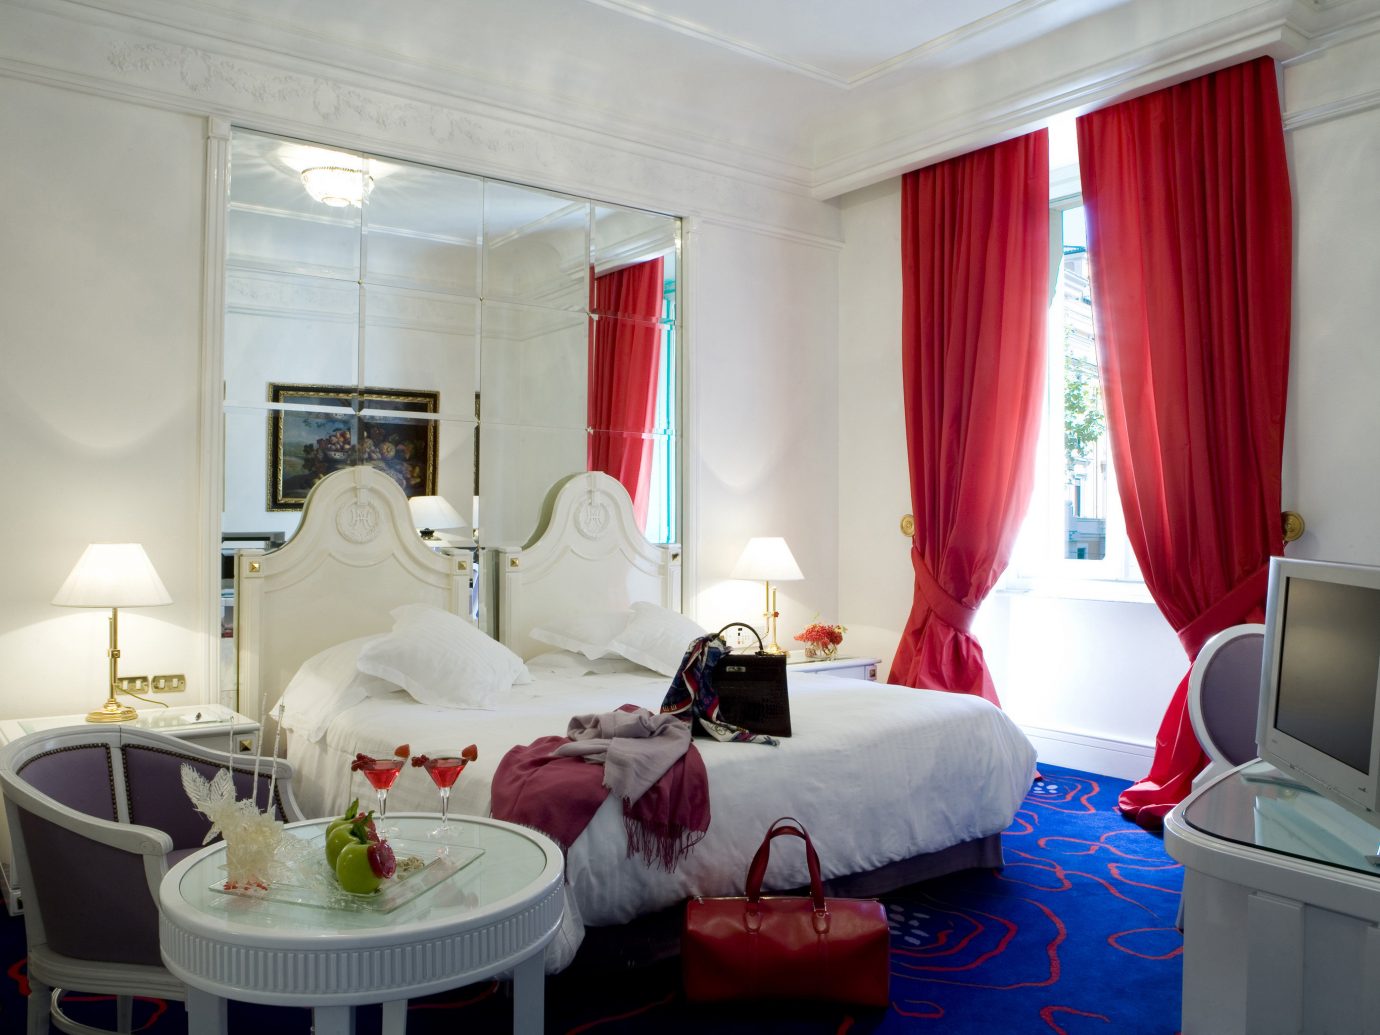 Boutique Hotels Italy Luxury Travel Romantic Hotels Rome indoor wall room floor Living property curtain Suite interior design red furniture Bedroom living room estate apartment cottage decorated flat cluttered several